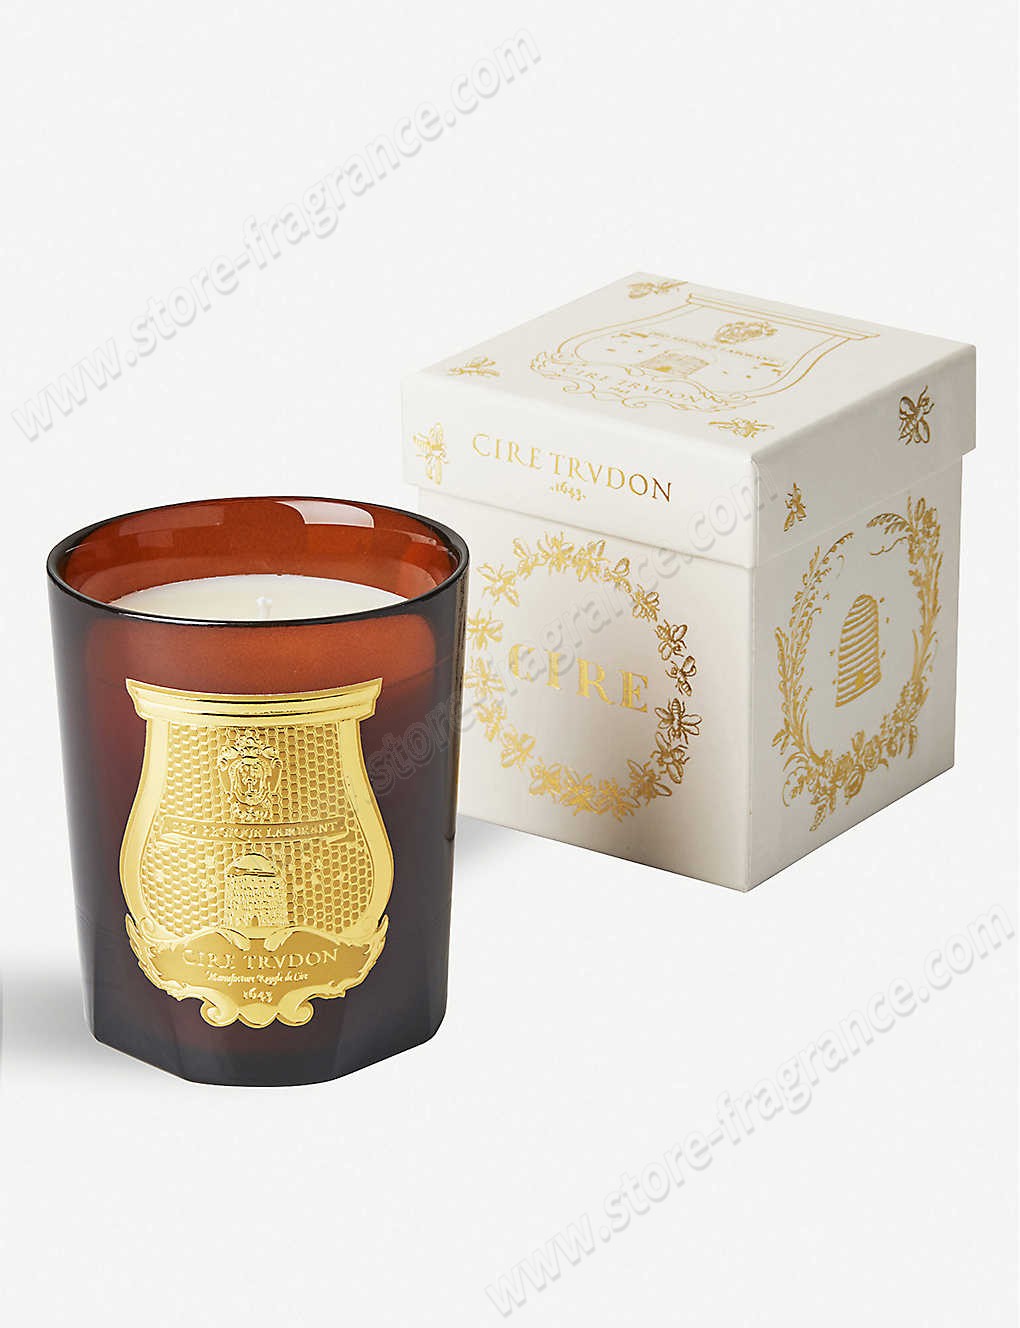 CIRE TRUDON/Cire scented beeswax candle 270g ✿ Discount Store - CIRE TRUDON/Cire scented beeswax candle 270g ✿ Discount Store